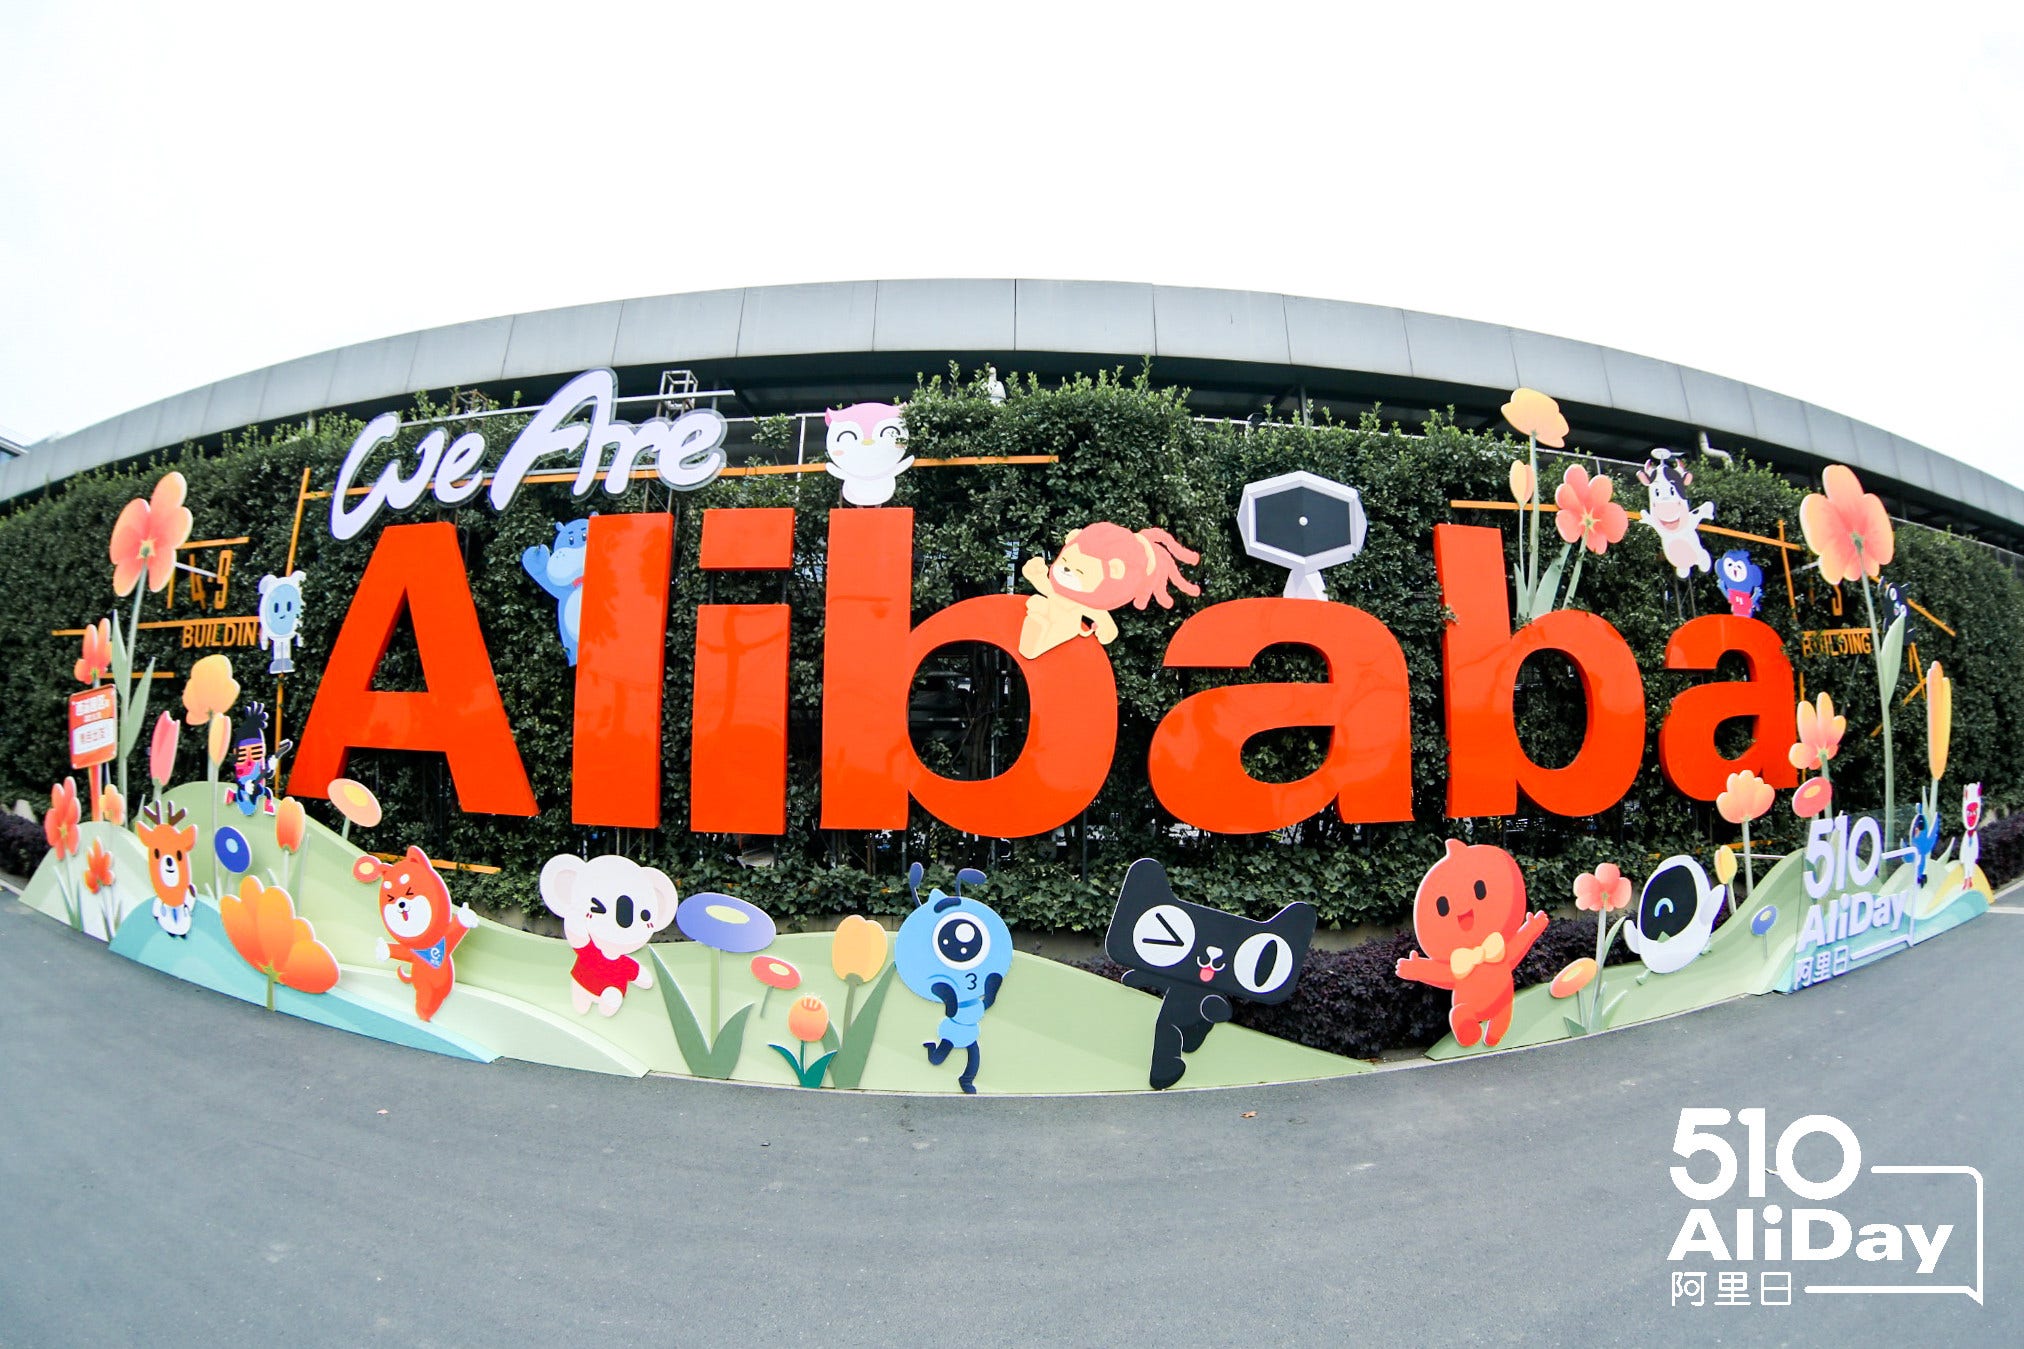 How Did Alibaba Fare With Its 2021 'Singles Day' Shopping Event?